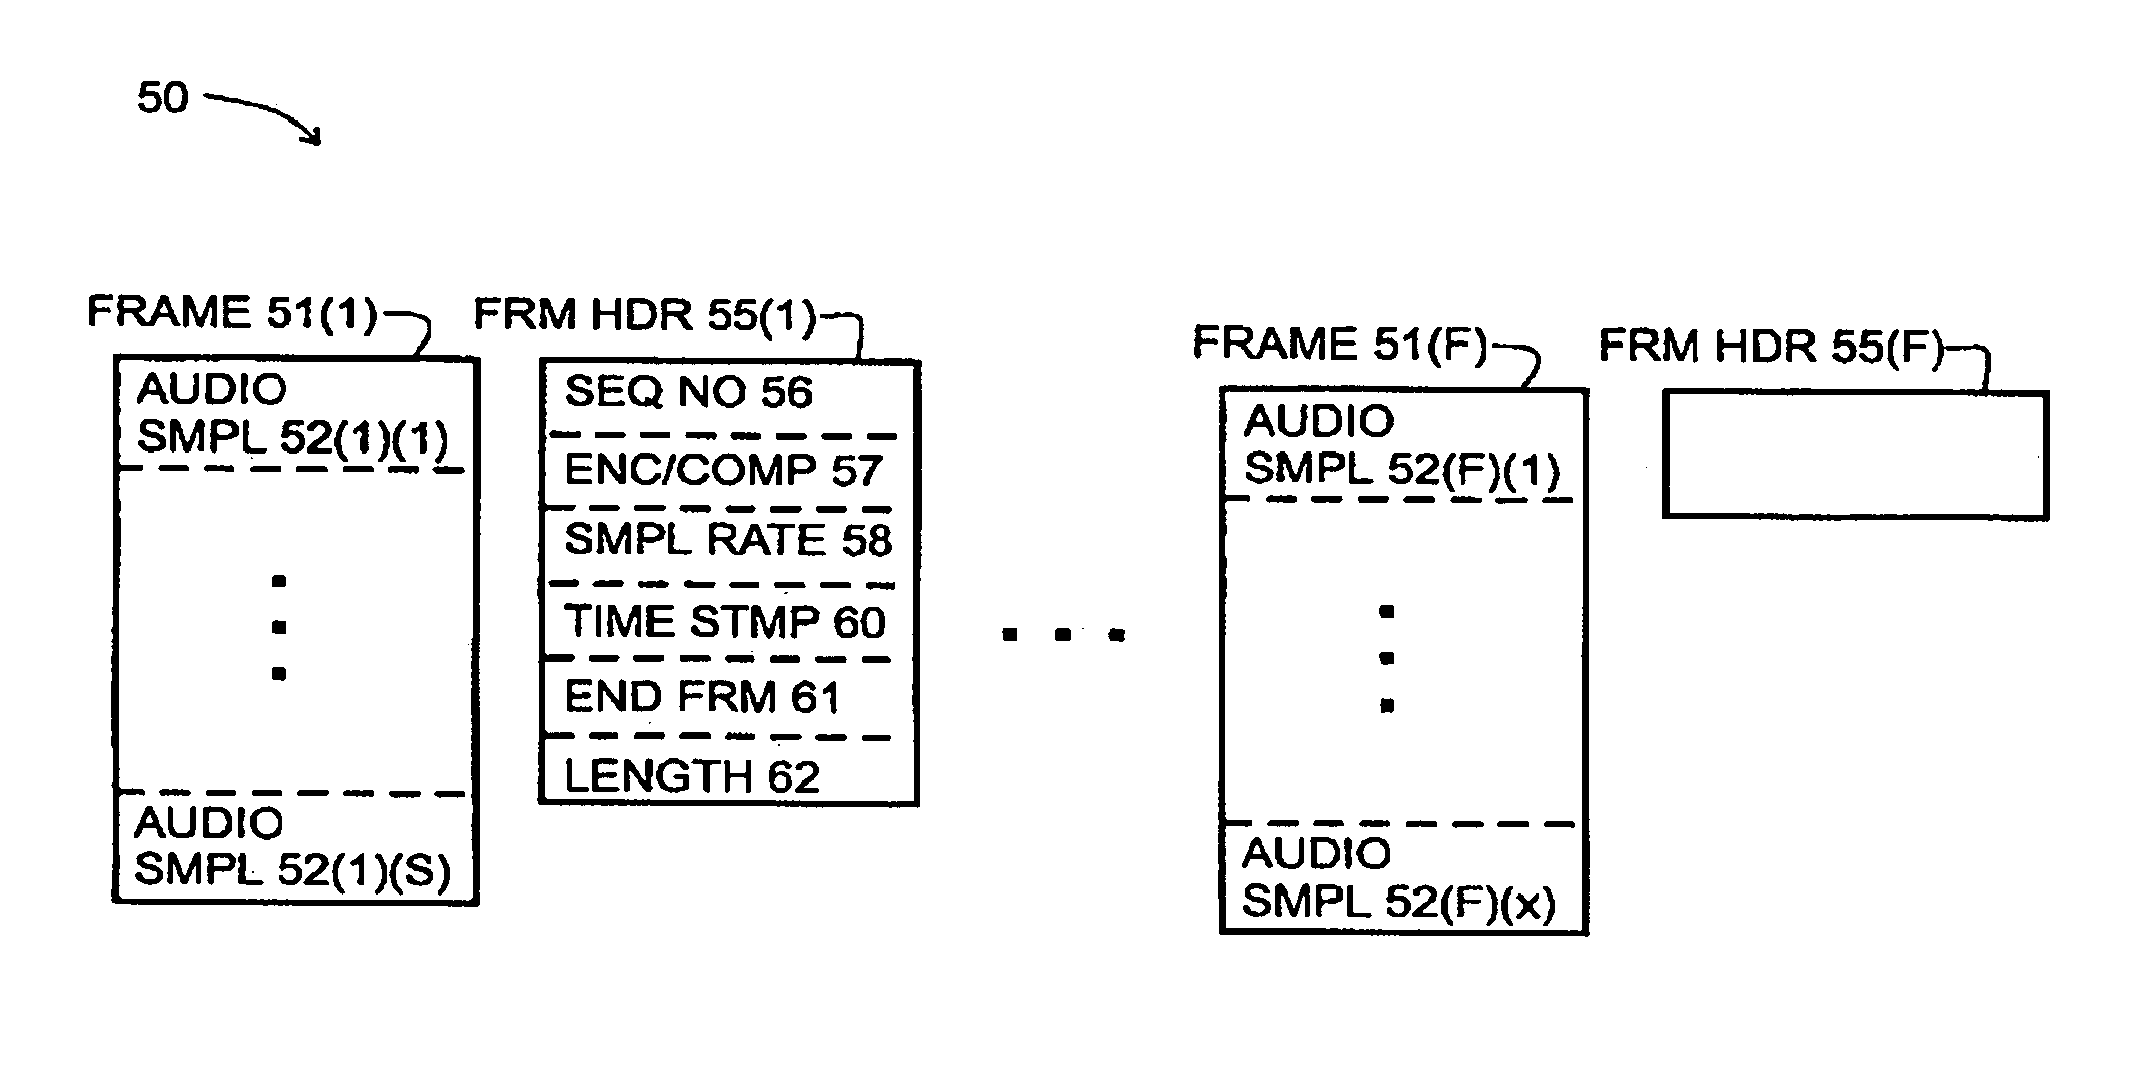 Systems and methods for synchronizing operations among a plurality of independently clocked digital data processing devices without a voltage controlled crystal oscillator